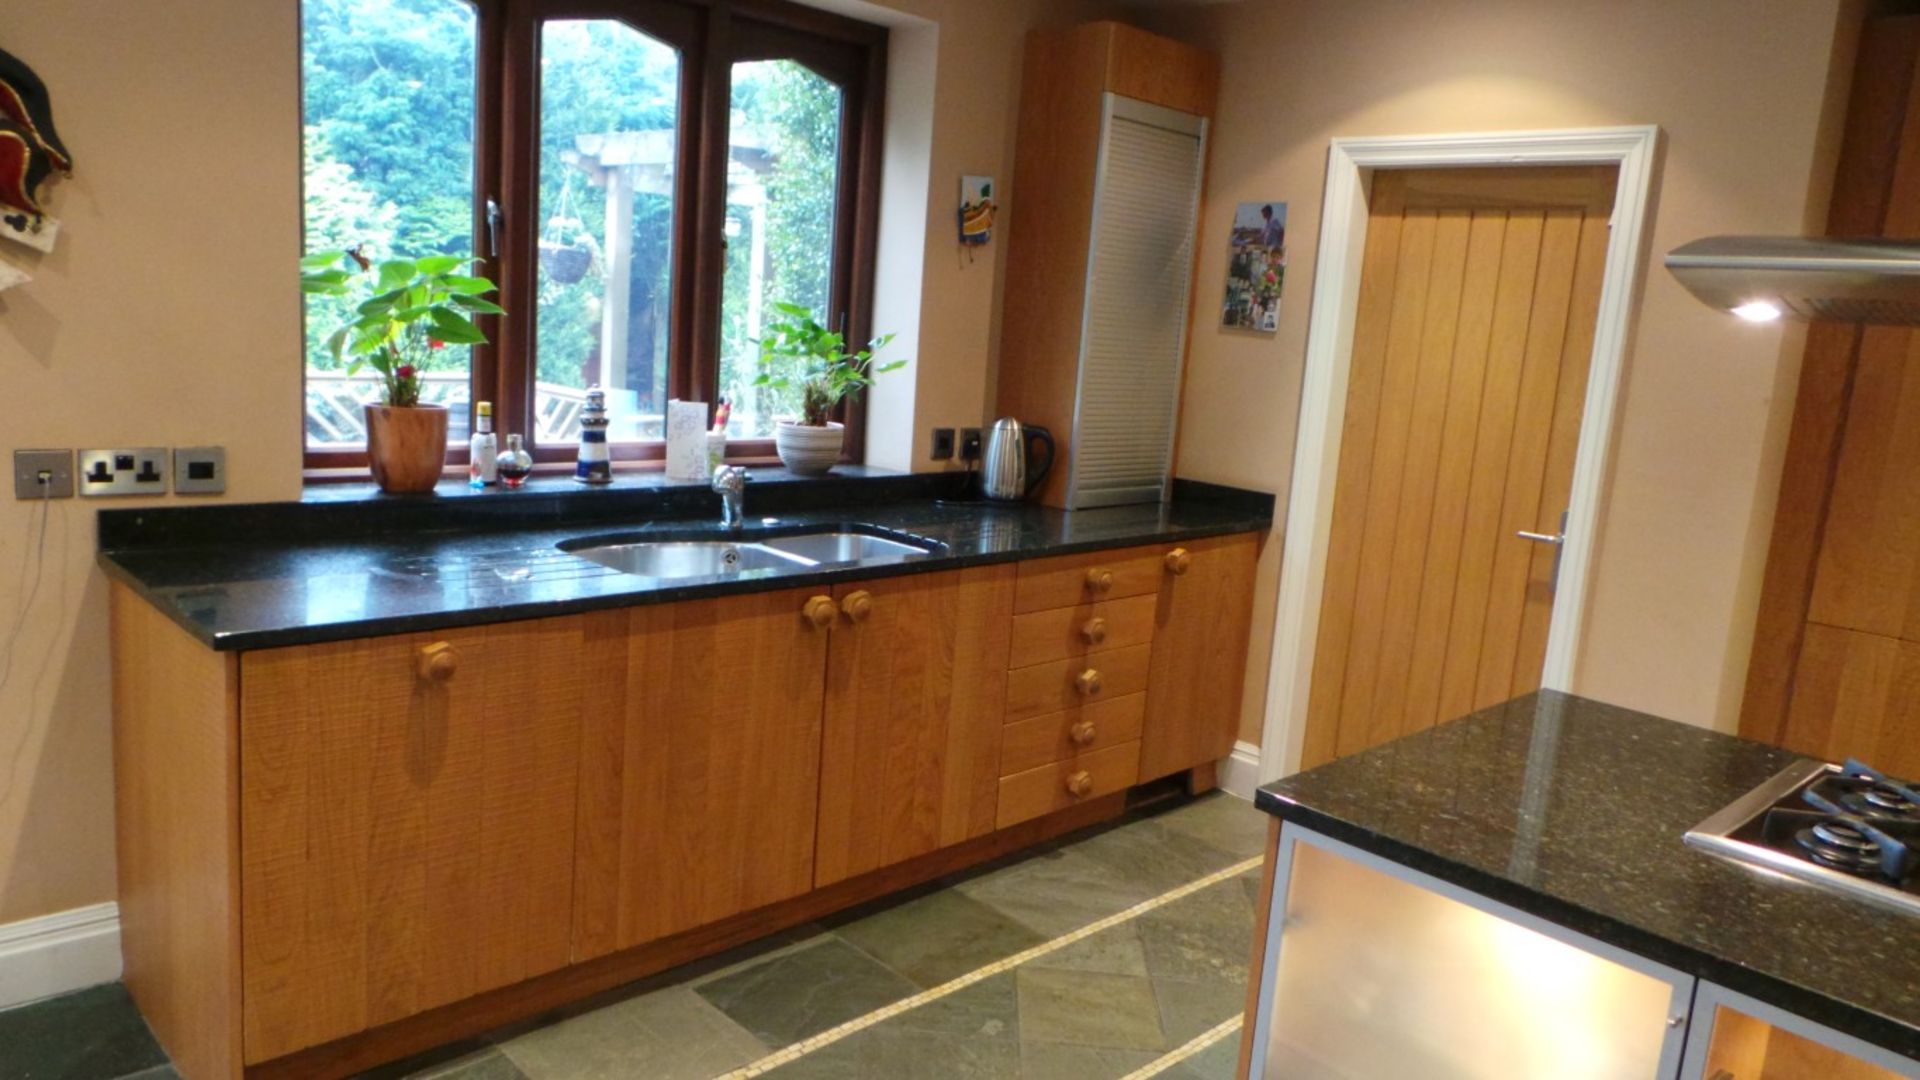 1 x Beautifully Crafted Bespoke Johnson & Johnson Fitted Kitchen - Rustic Solid Oak Doors, Modern - Image 3 of 86